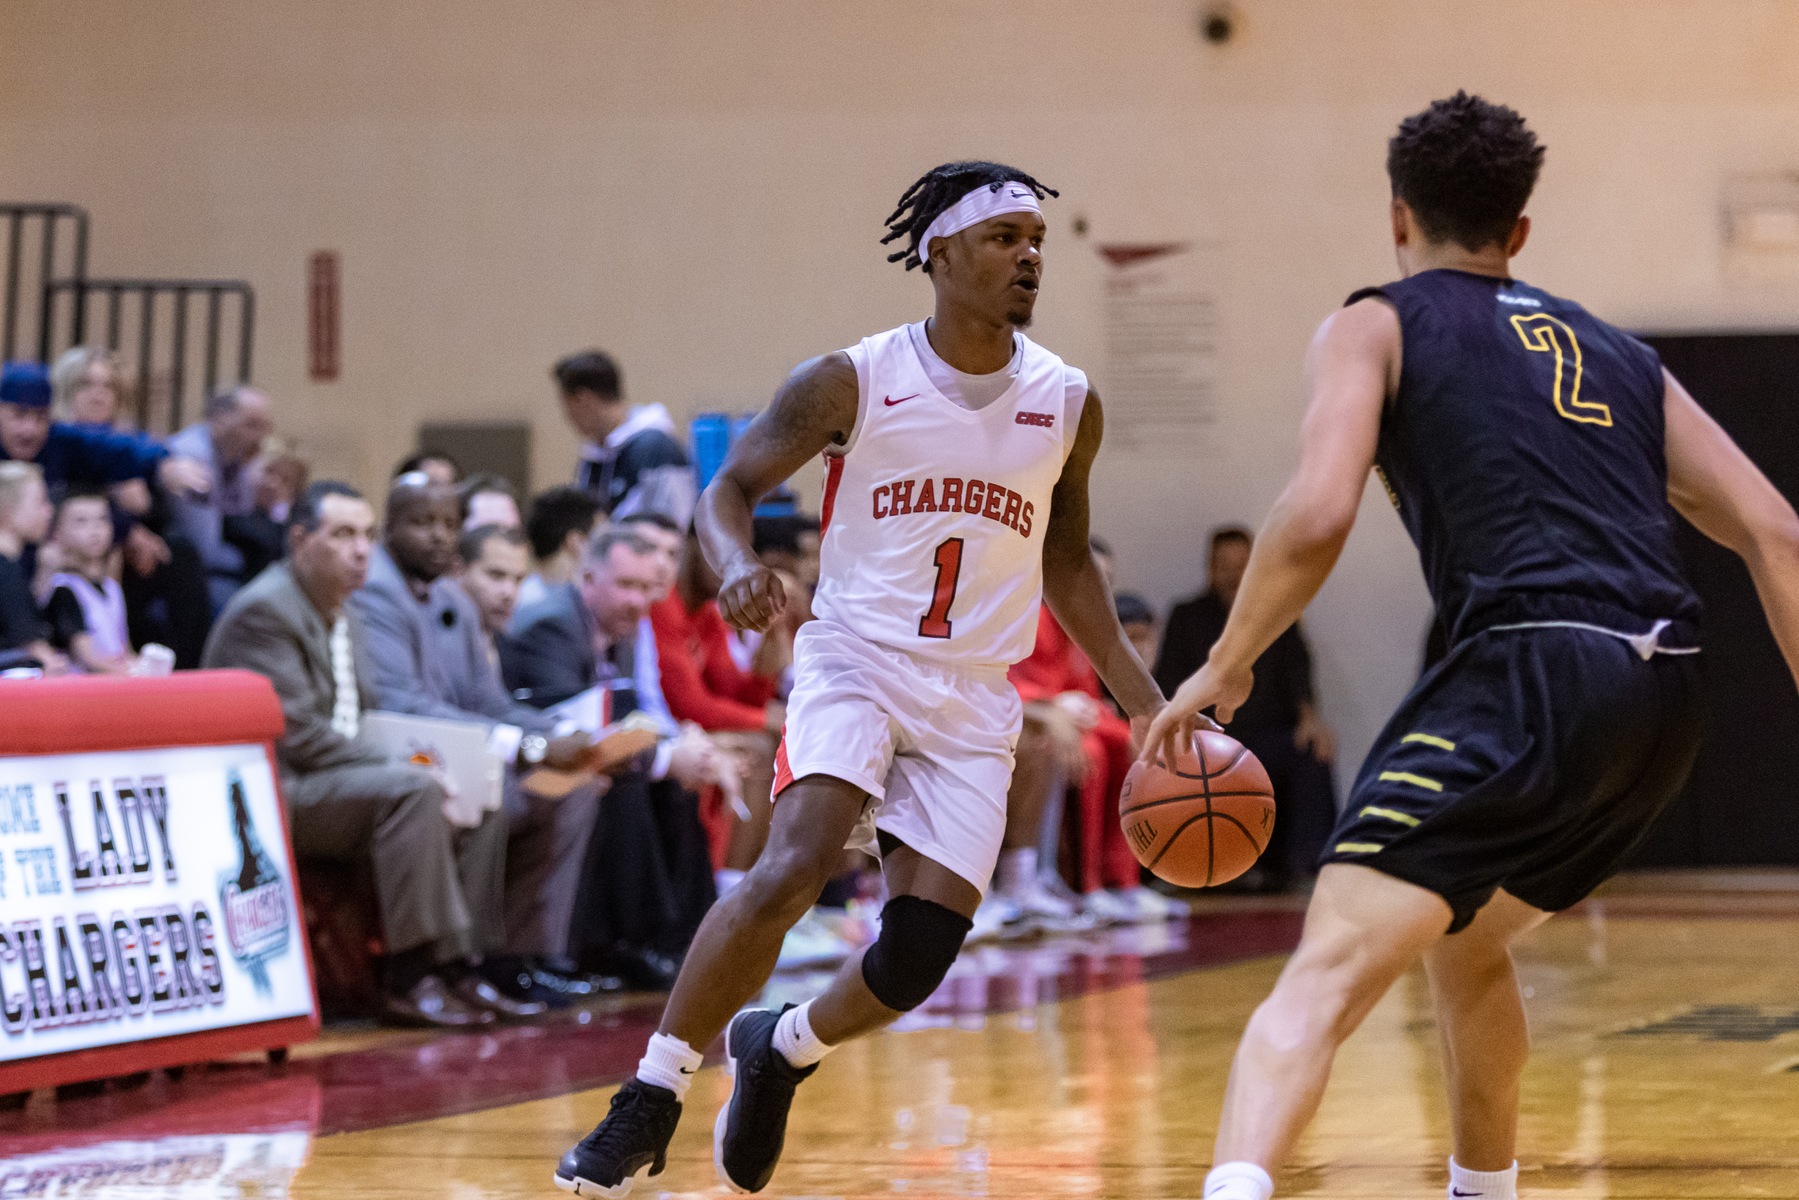 MEN'S BASKETBALL EARNS CONFERENCE WIN OVER CHESTNUT HILL COLLEGE